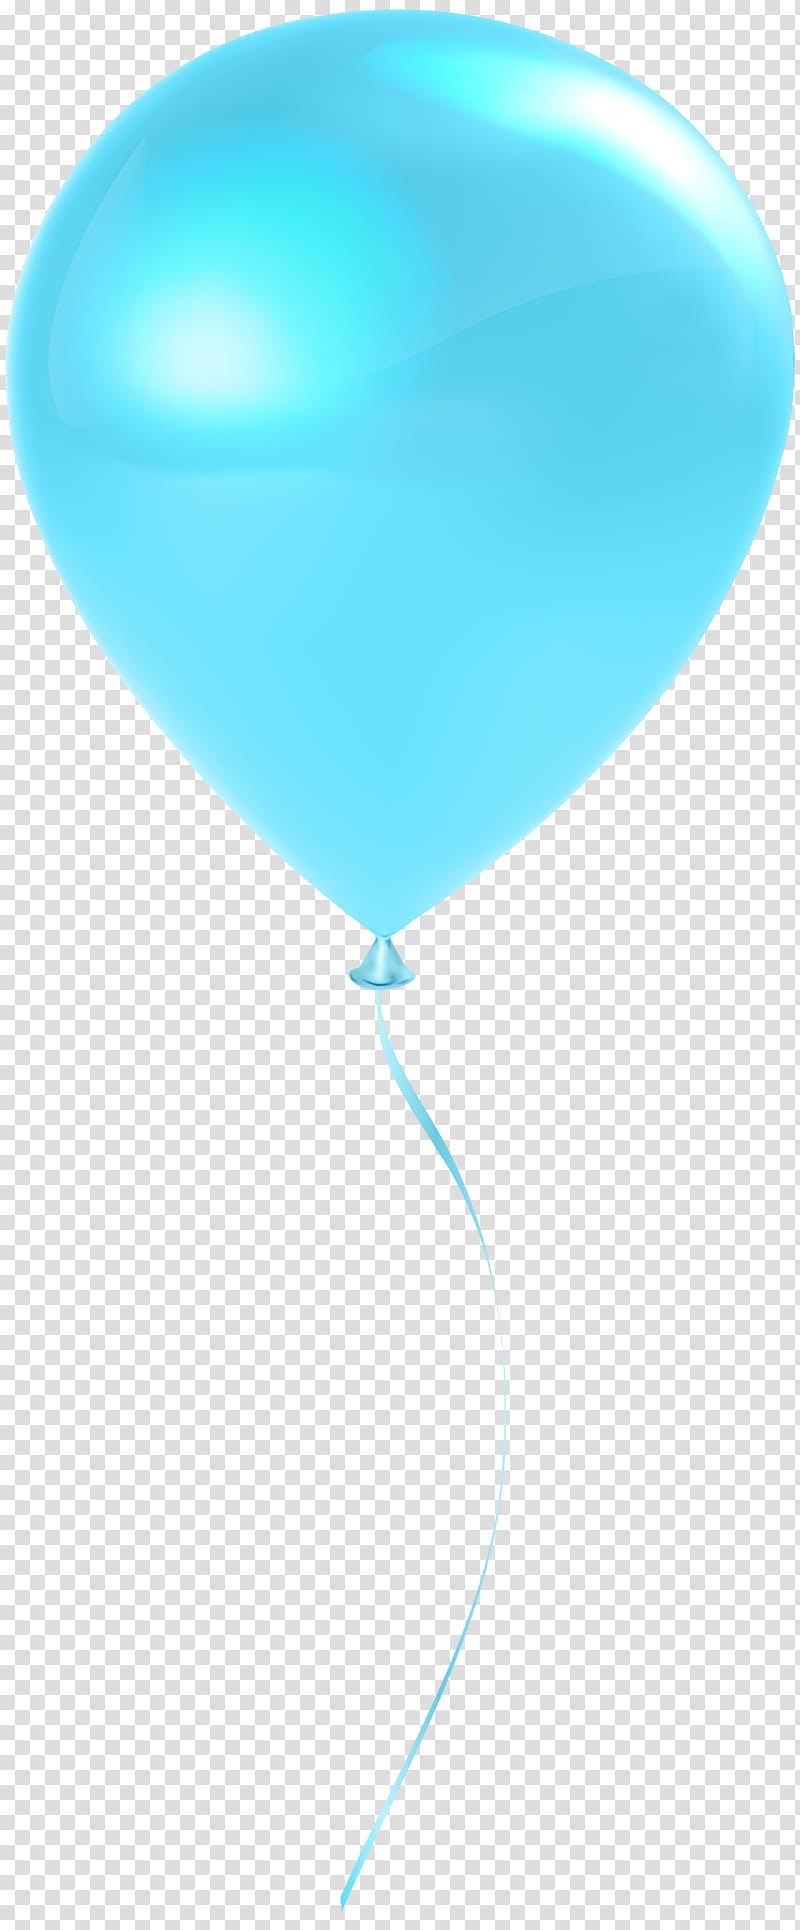 Watercolor Balloons, Paint, Wet Ink, Blue, Balloon Weights, Green Balloons, Turquoise, Turquoise Balloons 11 transparent background PNG clipart